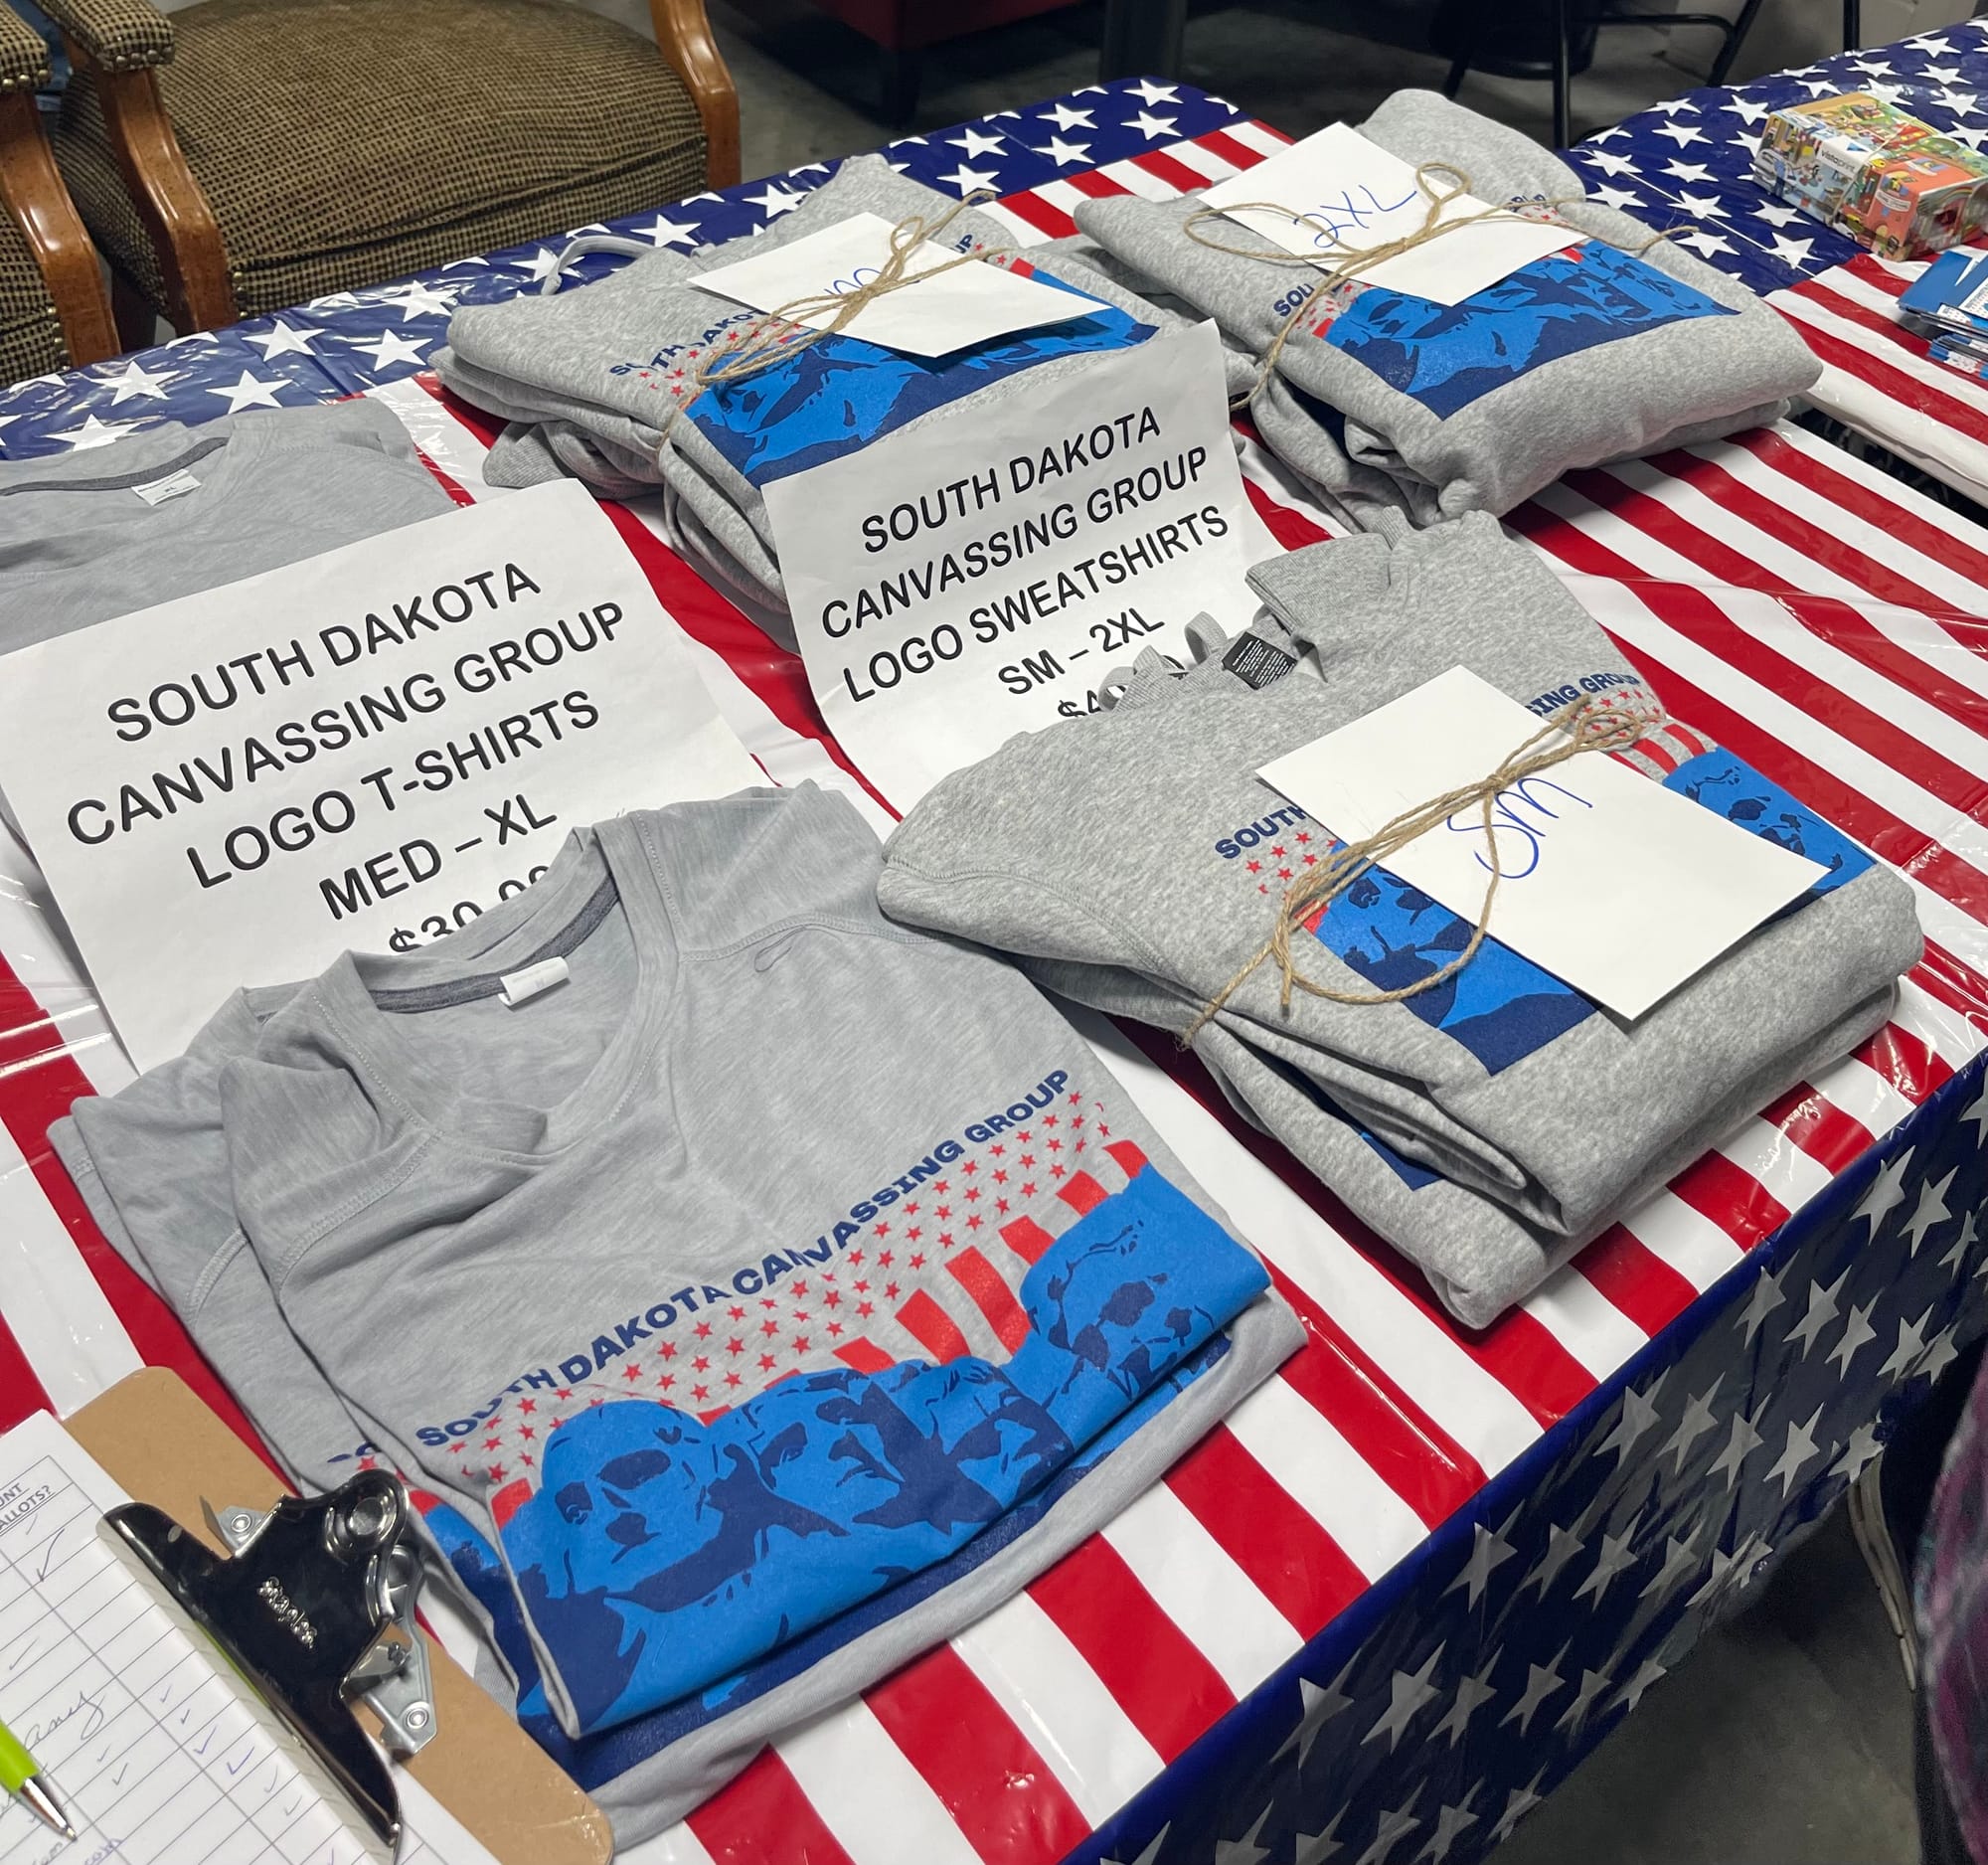 T-shirts for sale at a South Dakota Canvassing event at the Military Heritage Alliance 